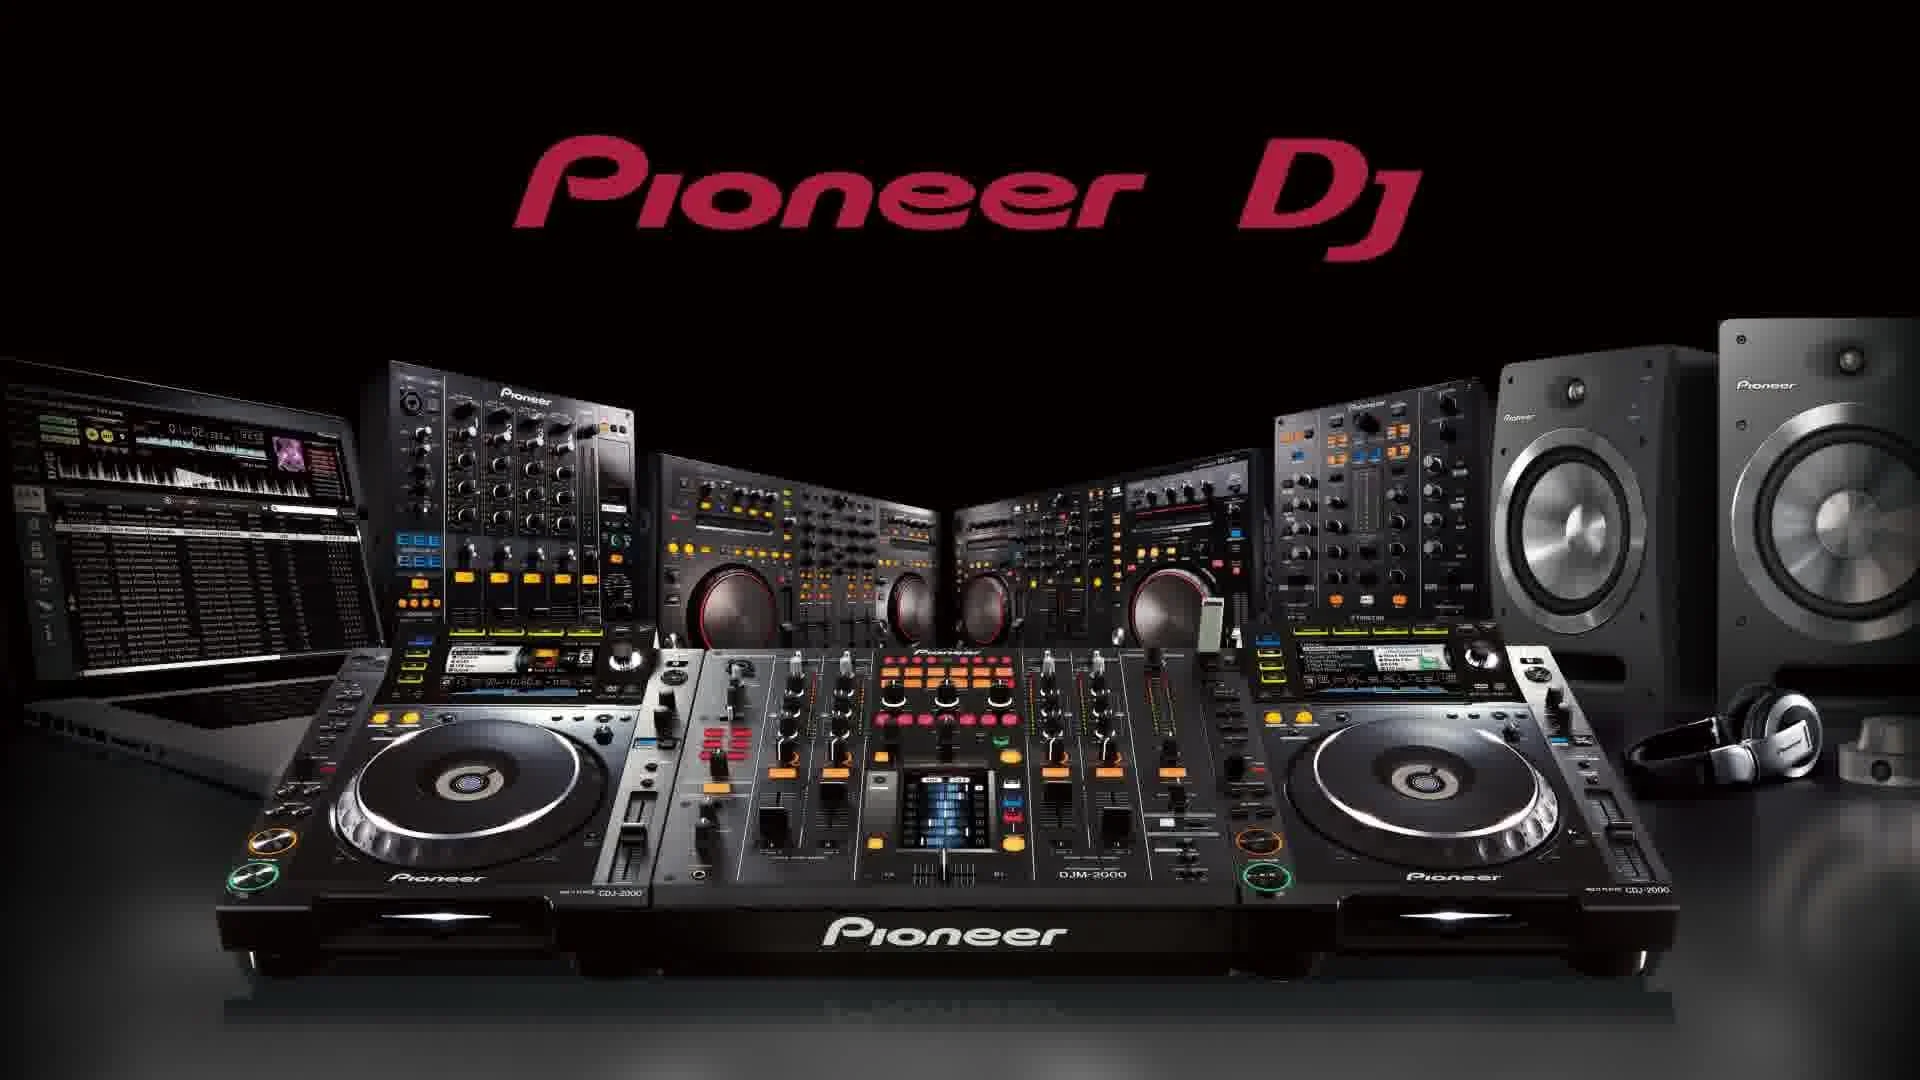 DJ Backgrounds Free Download Wallpapers, Backgrounds, Images